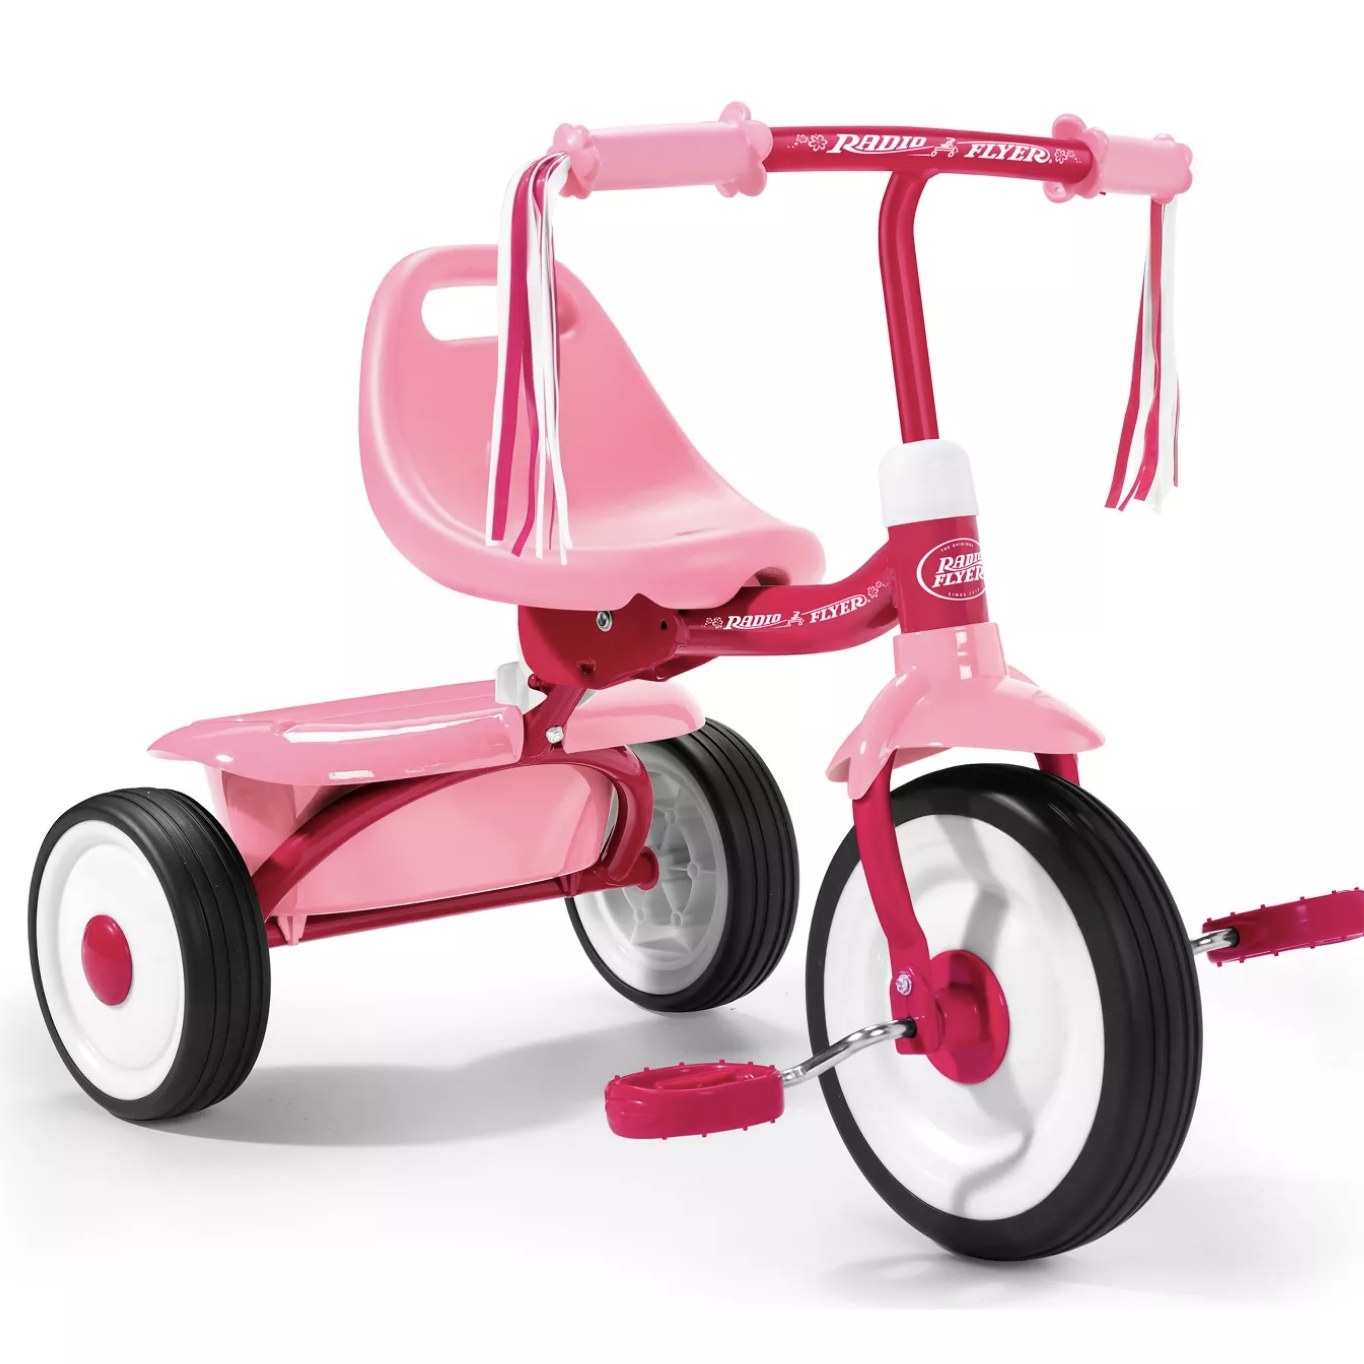 A pink tricycle